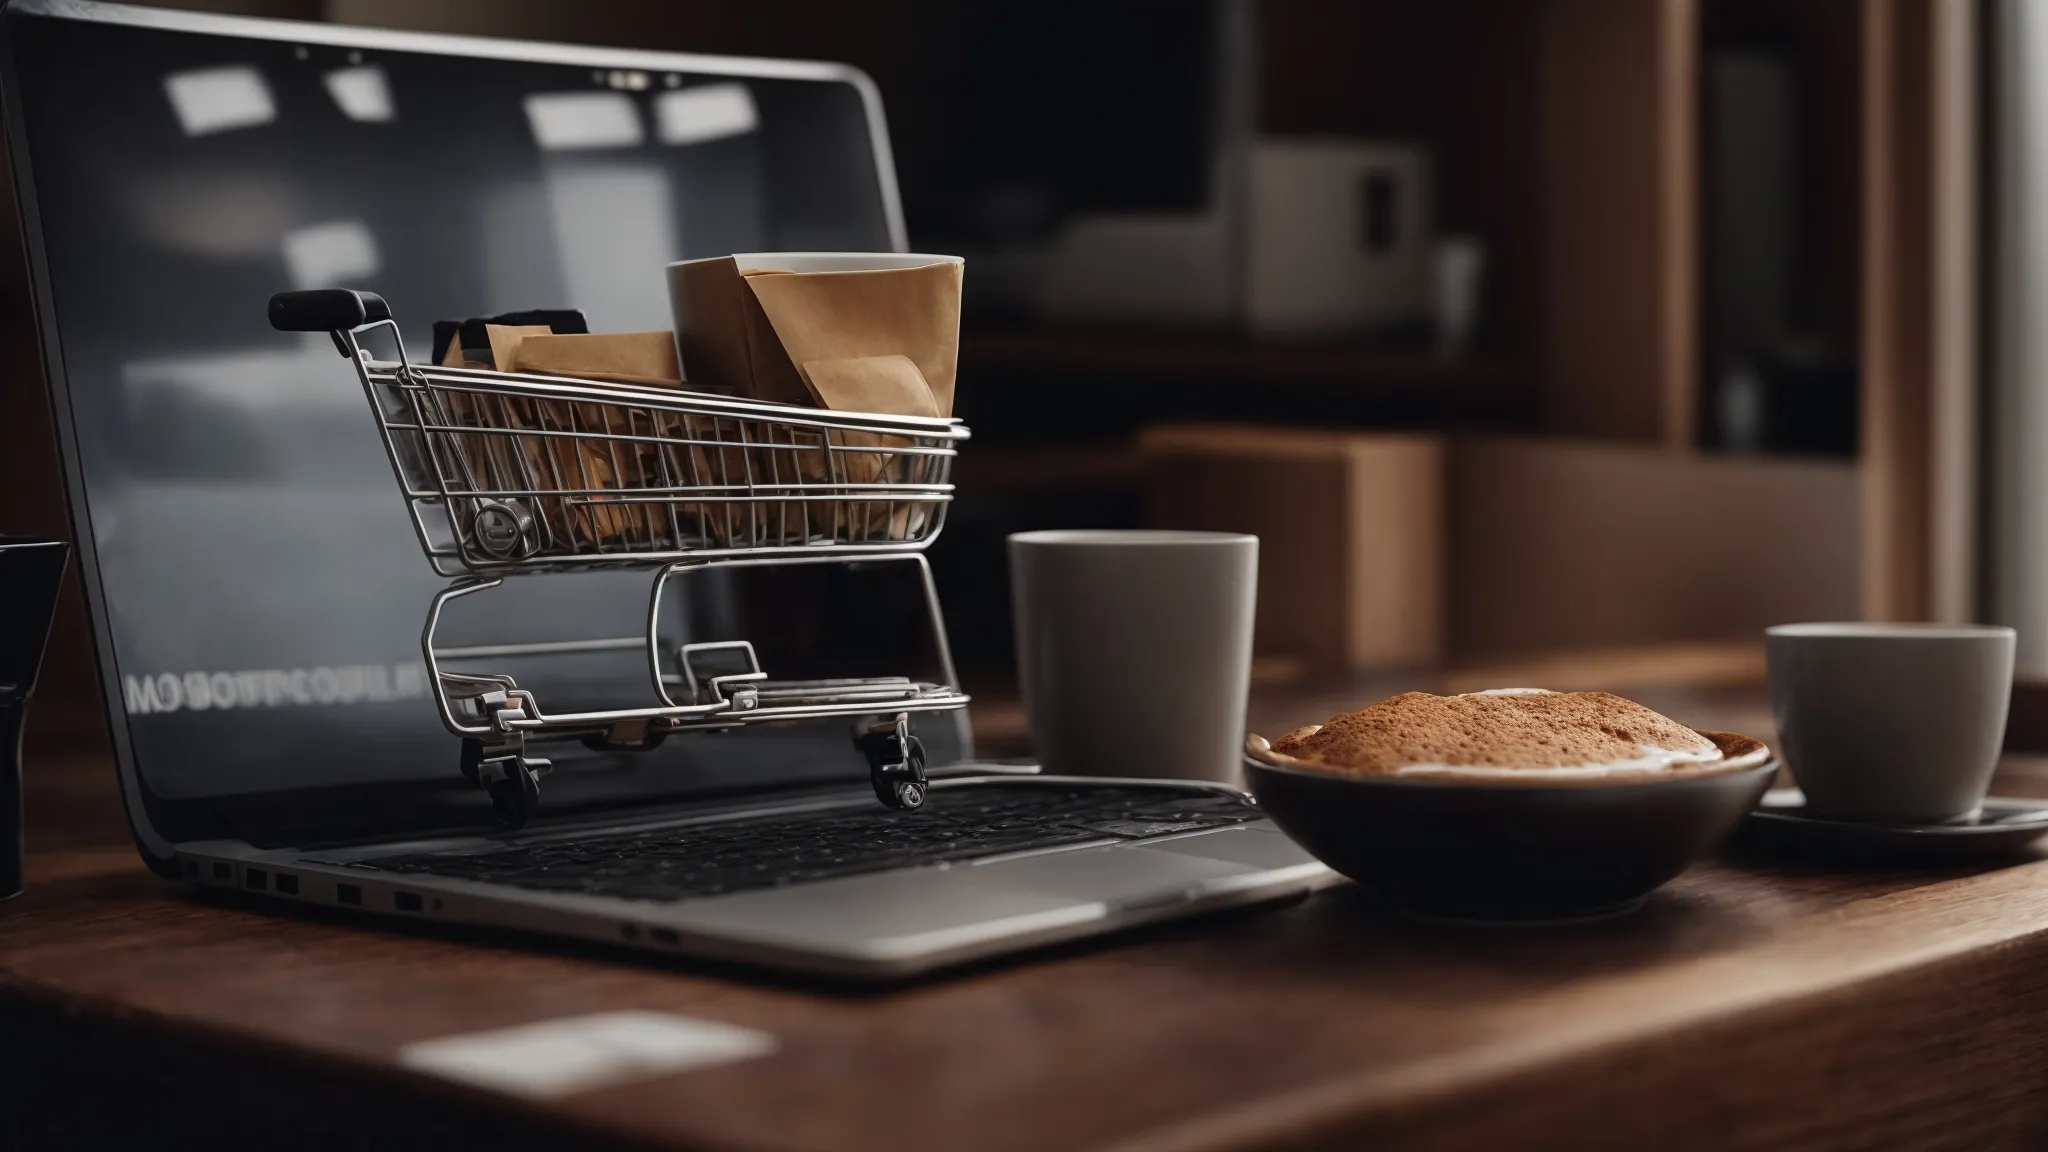 a laptop displaying shopping cart icons rests next to a notepad and a cup of coffee on a wooden desk.